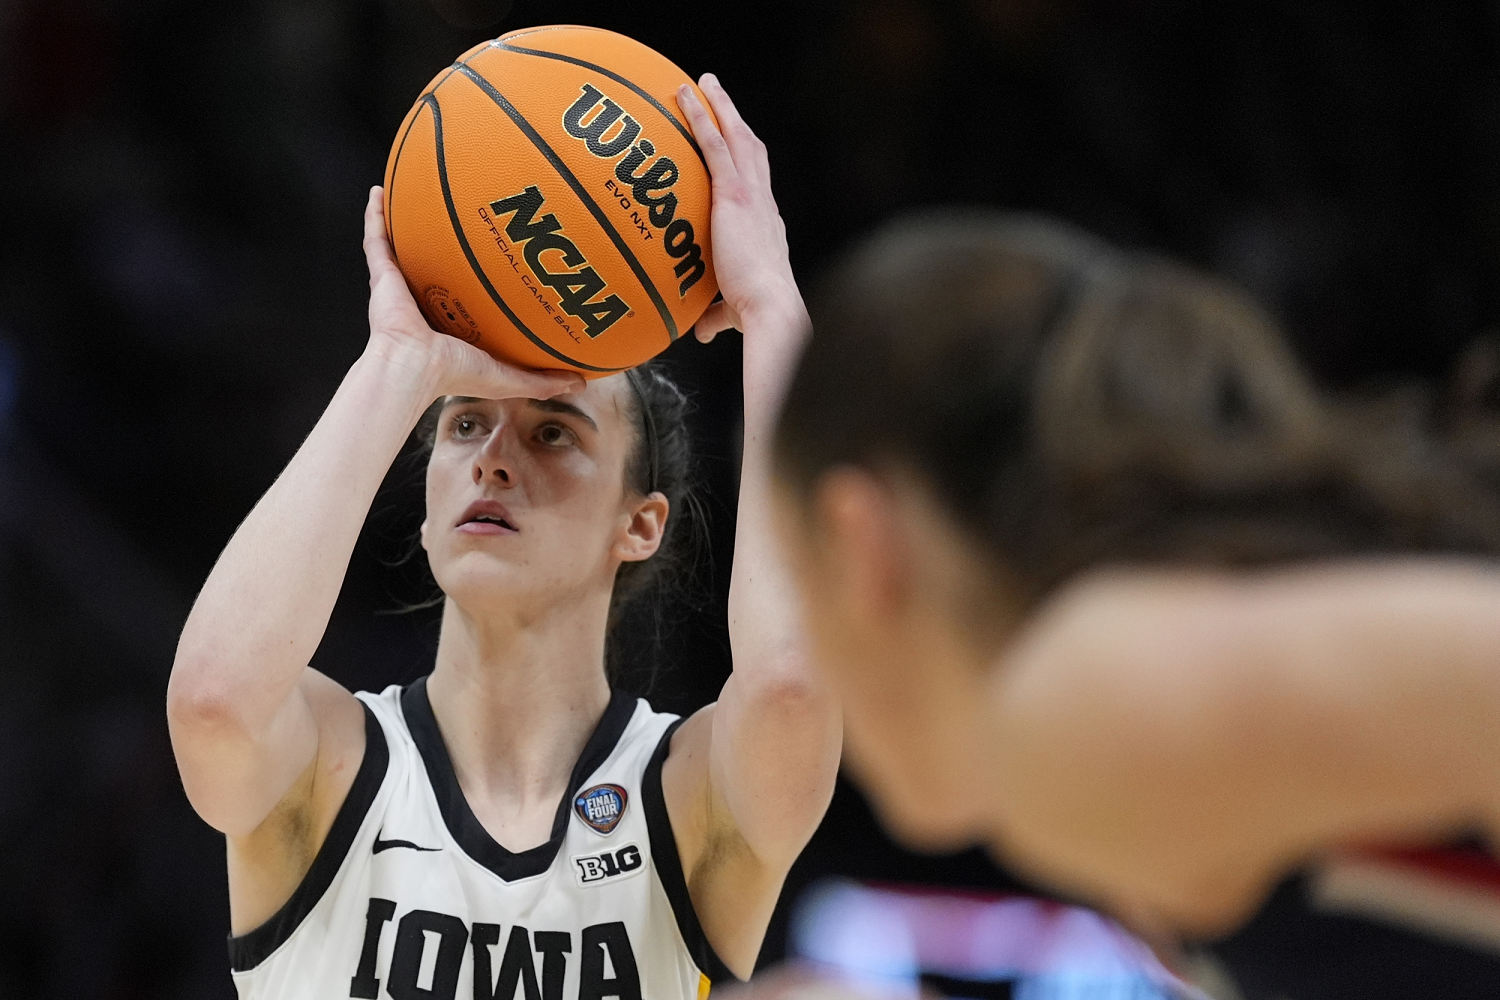 Iowa-UConn Final Four matchup draws 14.2 million viewers, most in women's college basketball history